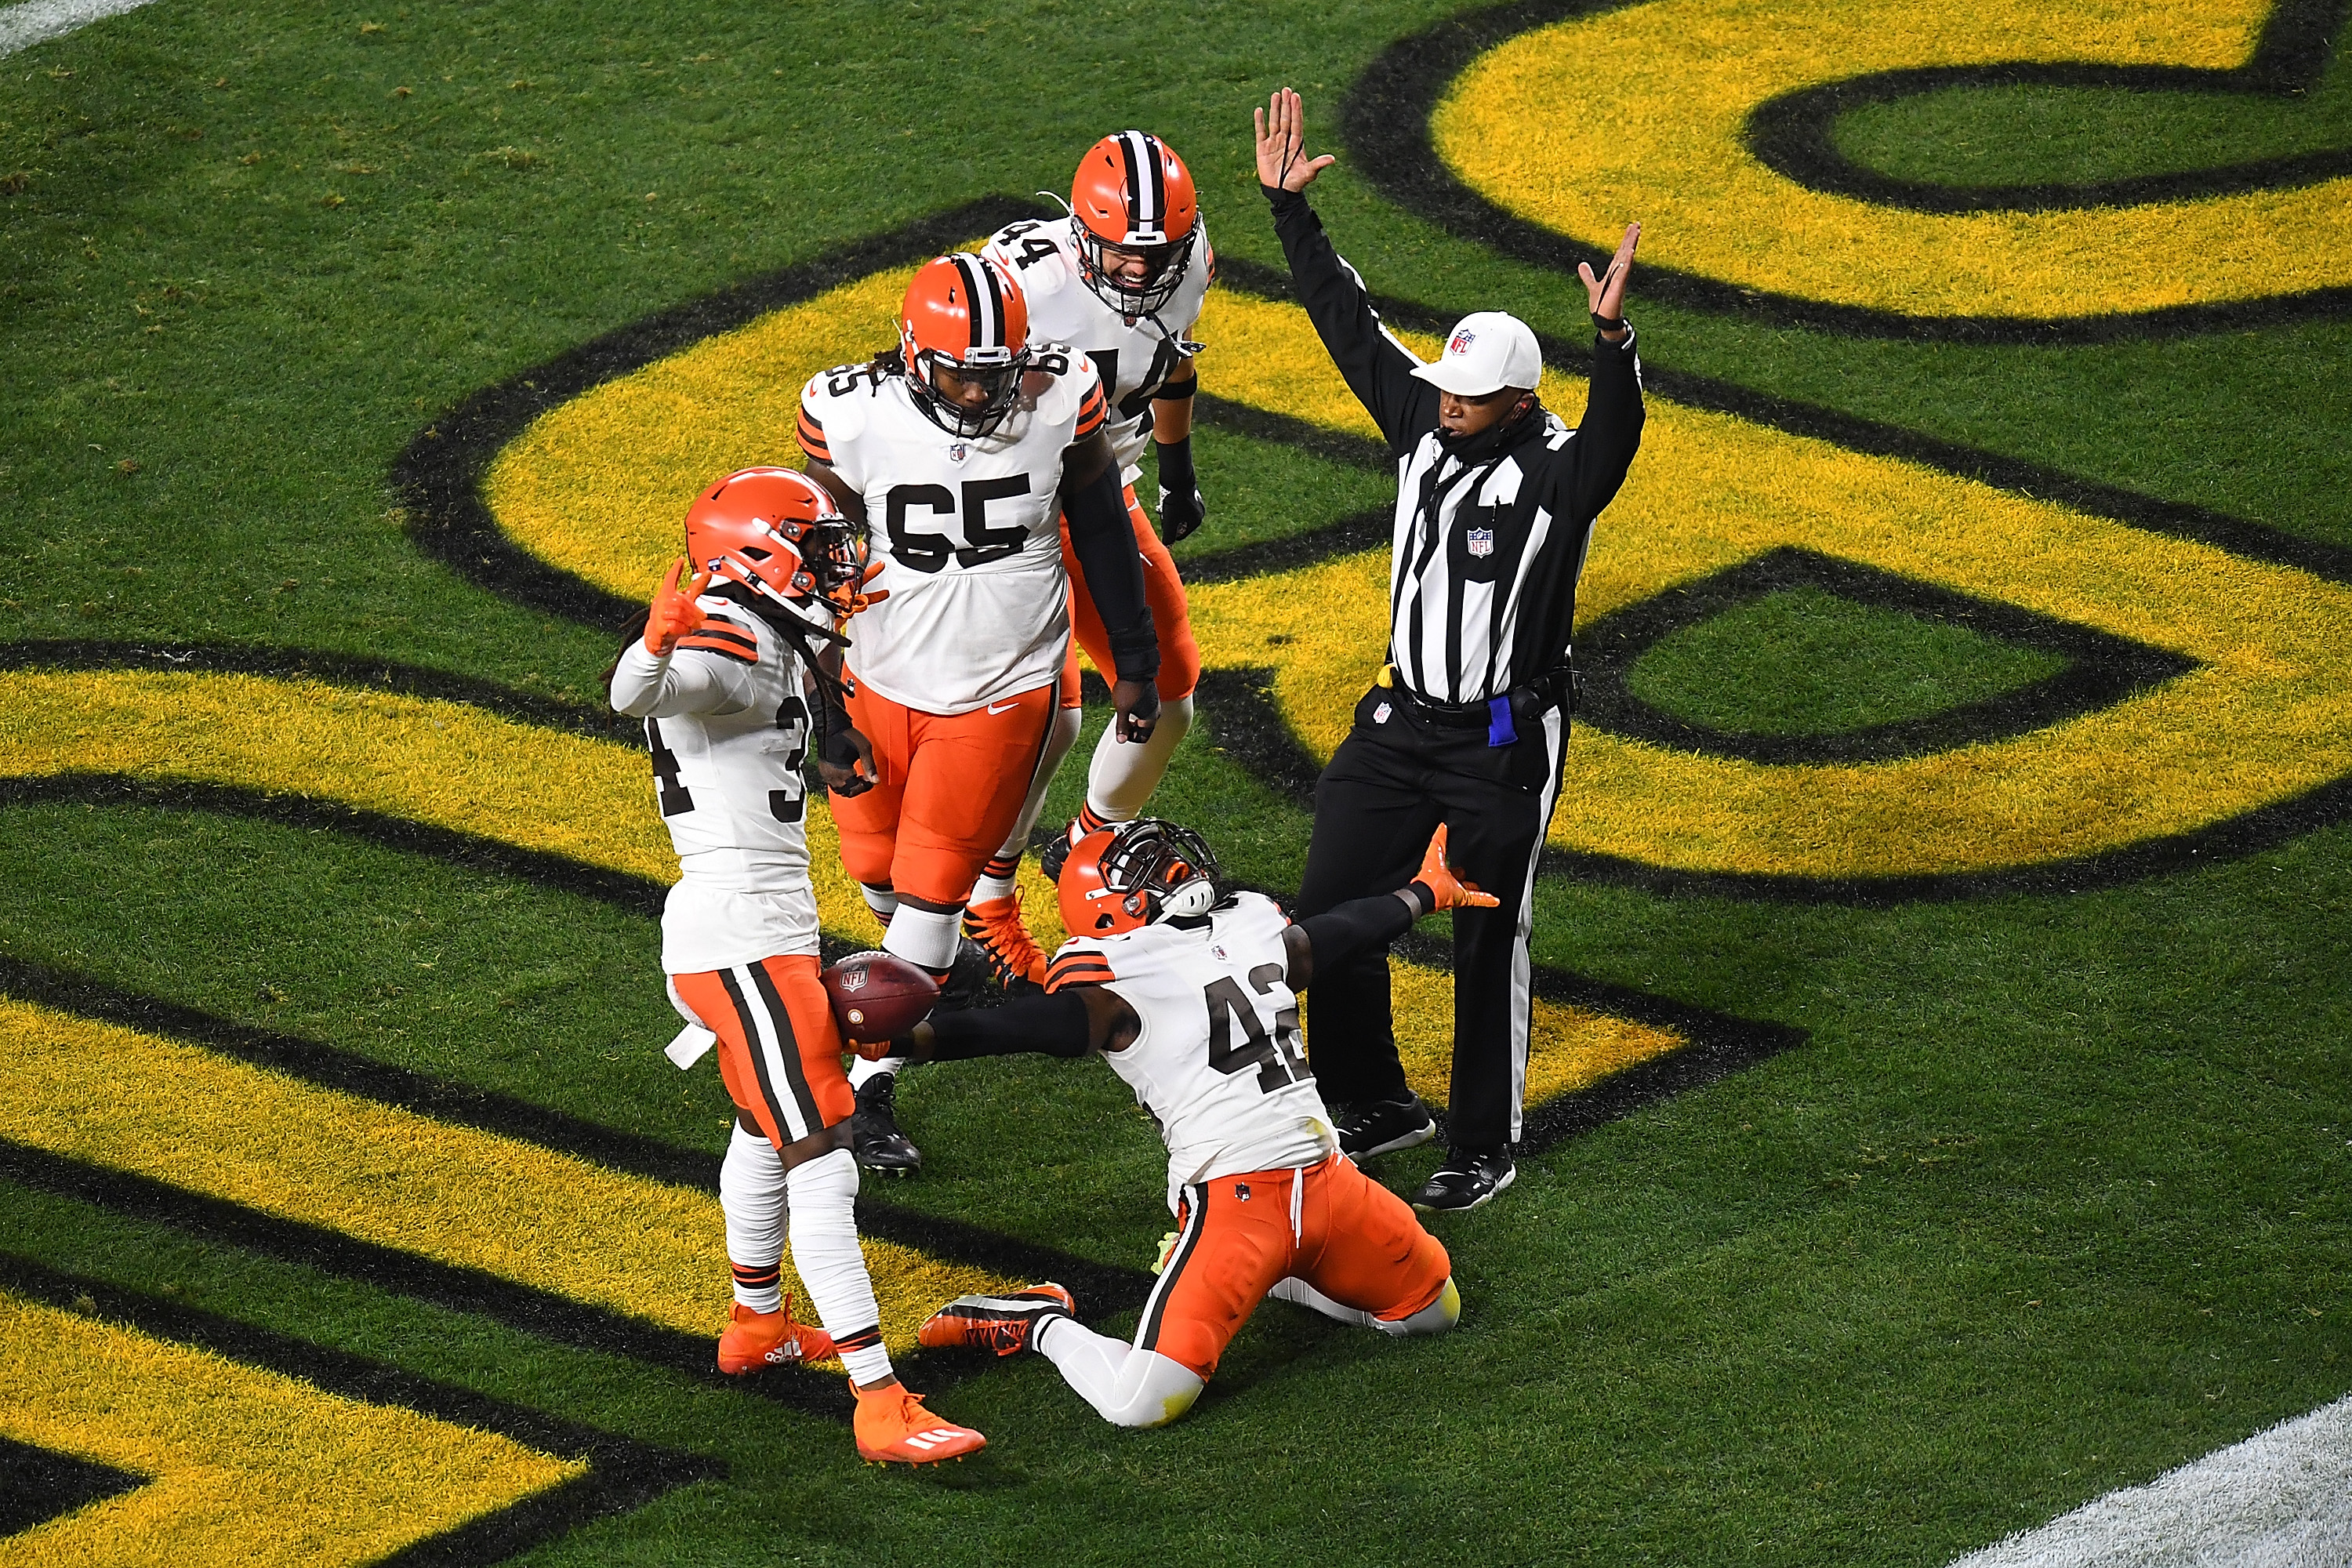 Wild Card Round - Cleveland Browns v Pittsburgh Steelers